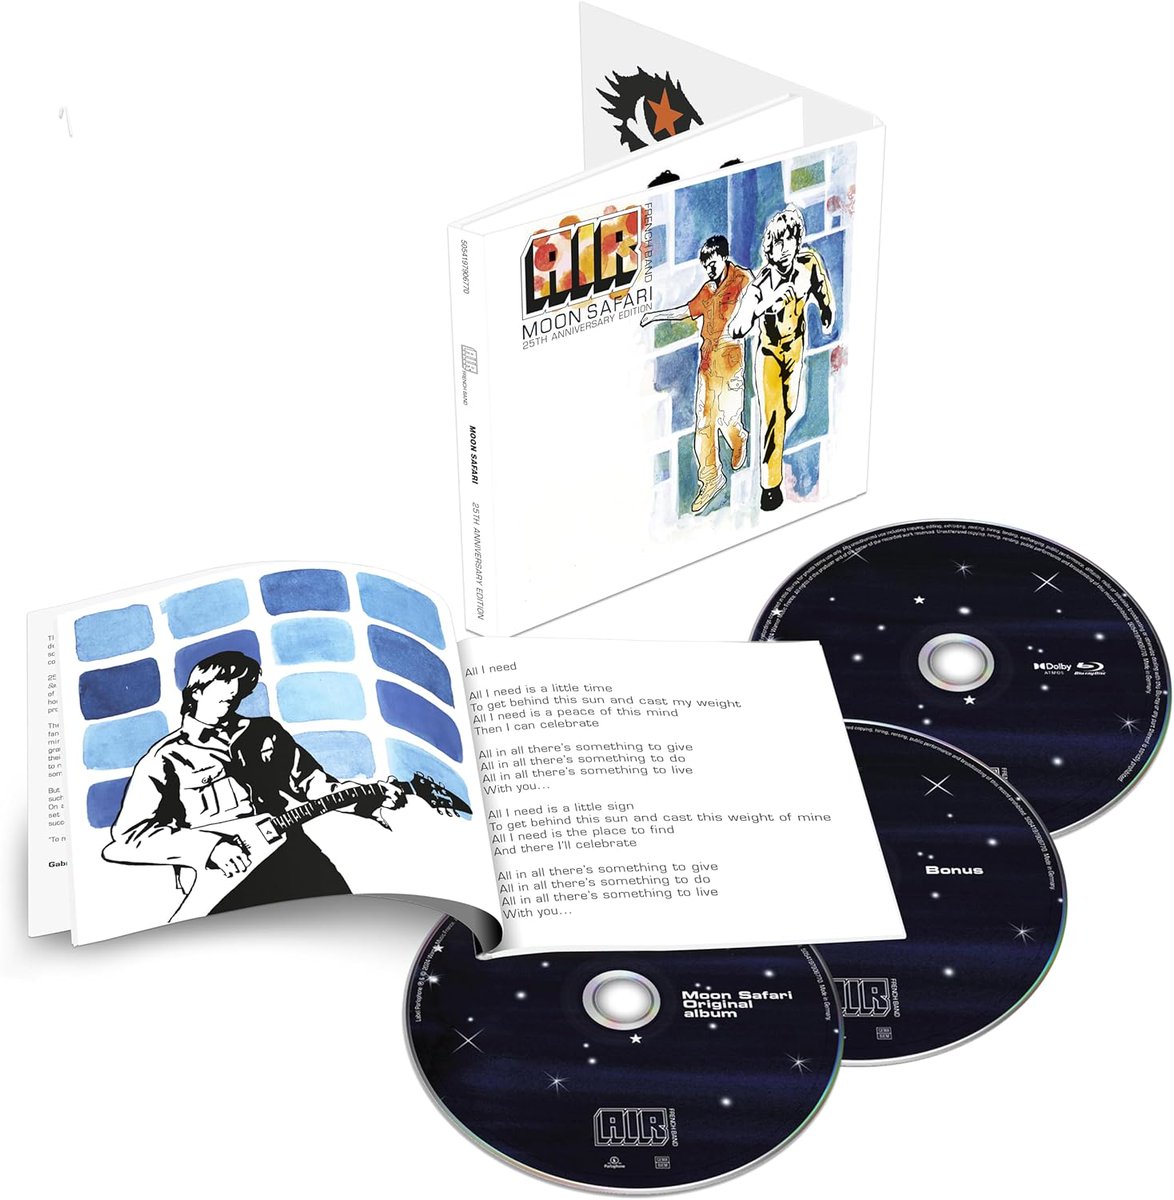 Pre-order the newly announced 2CD+blu-ray edition of Air's 'Moon Safari' from the SDE shop > bit.ly/49bU1iL